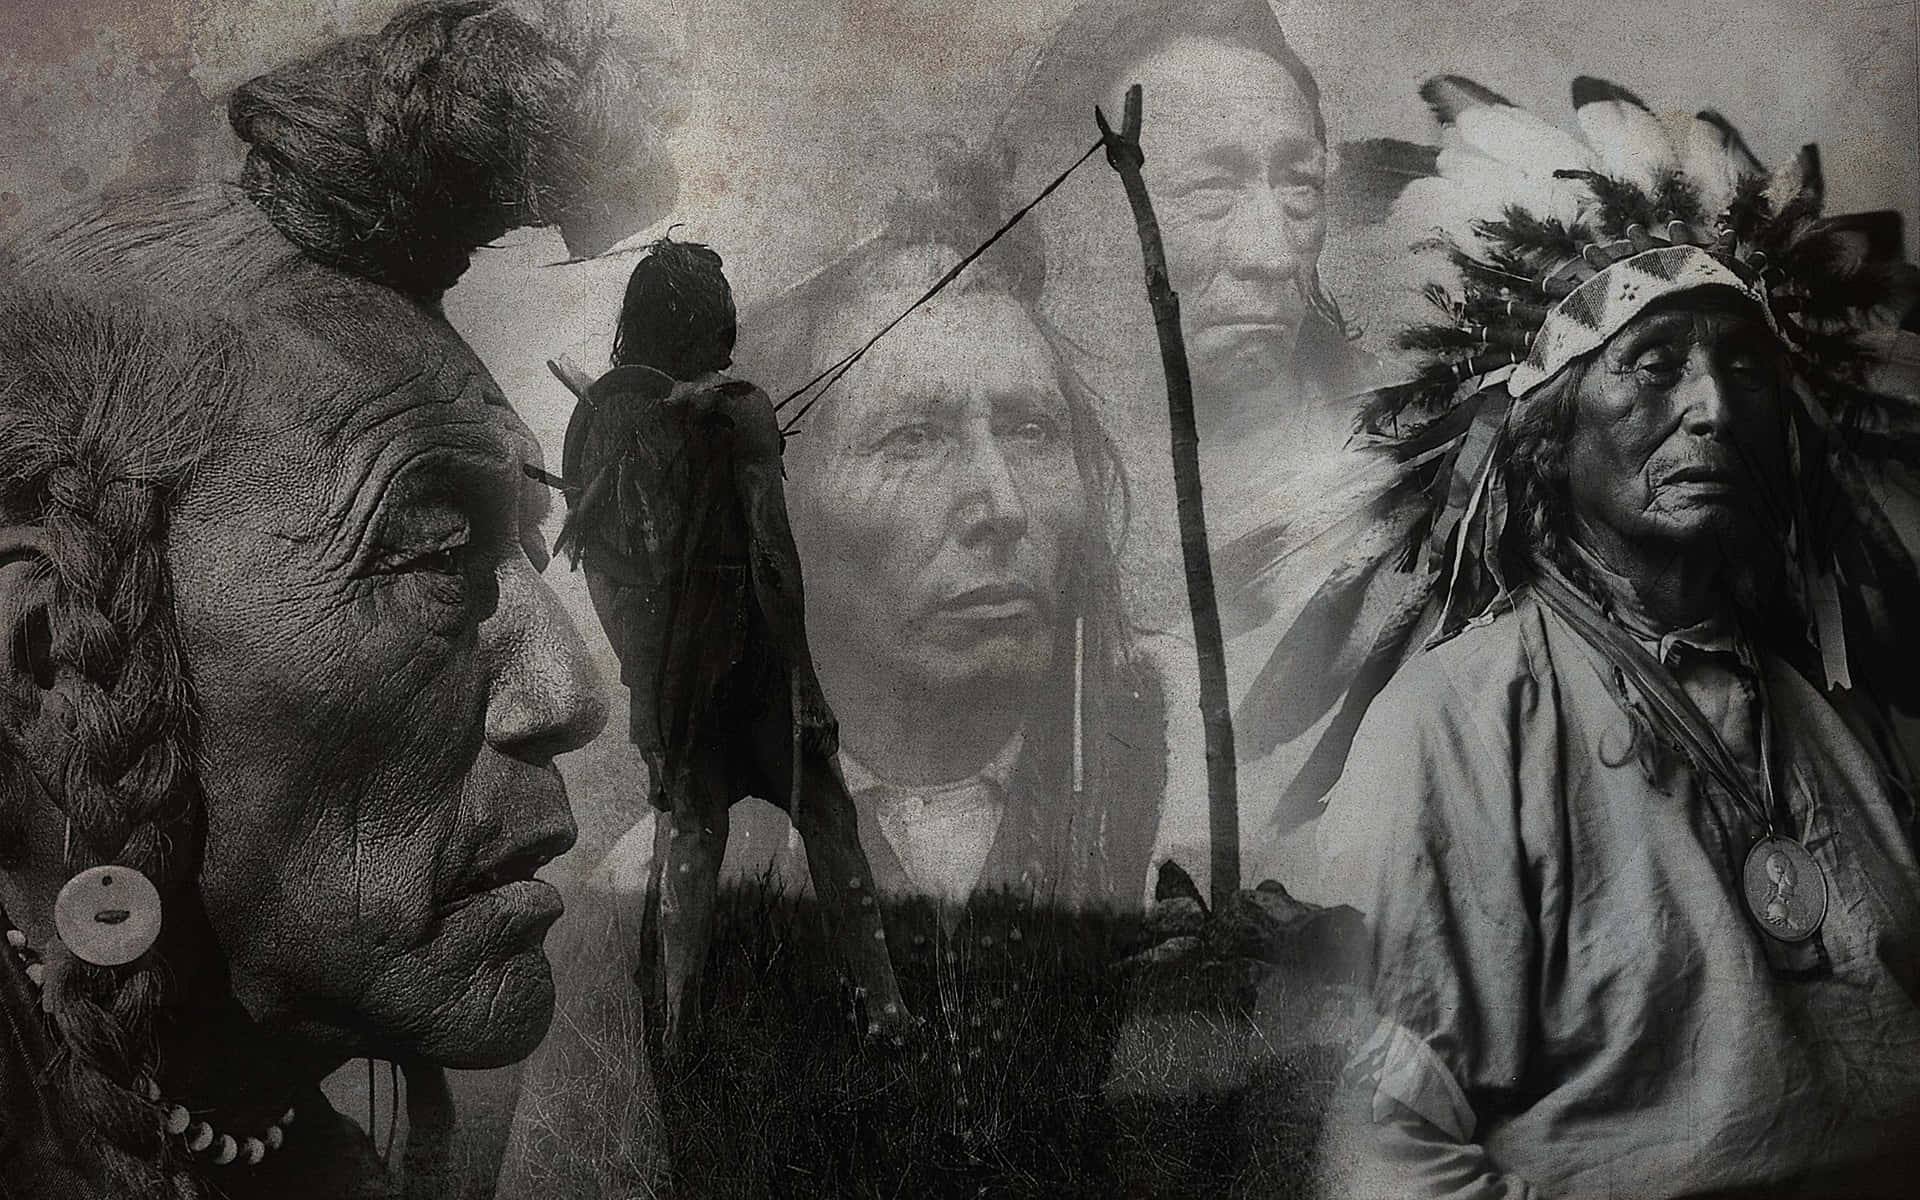 A proud and stoic Native American Indian stands against a lush landscape. Wallpaper